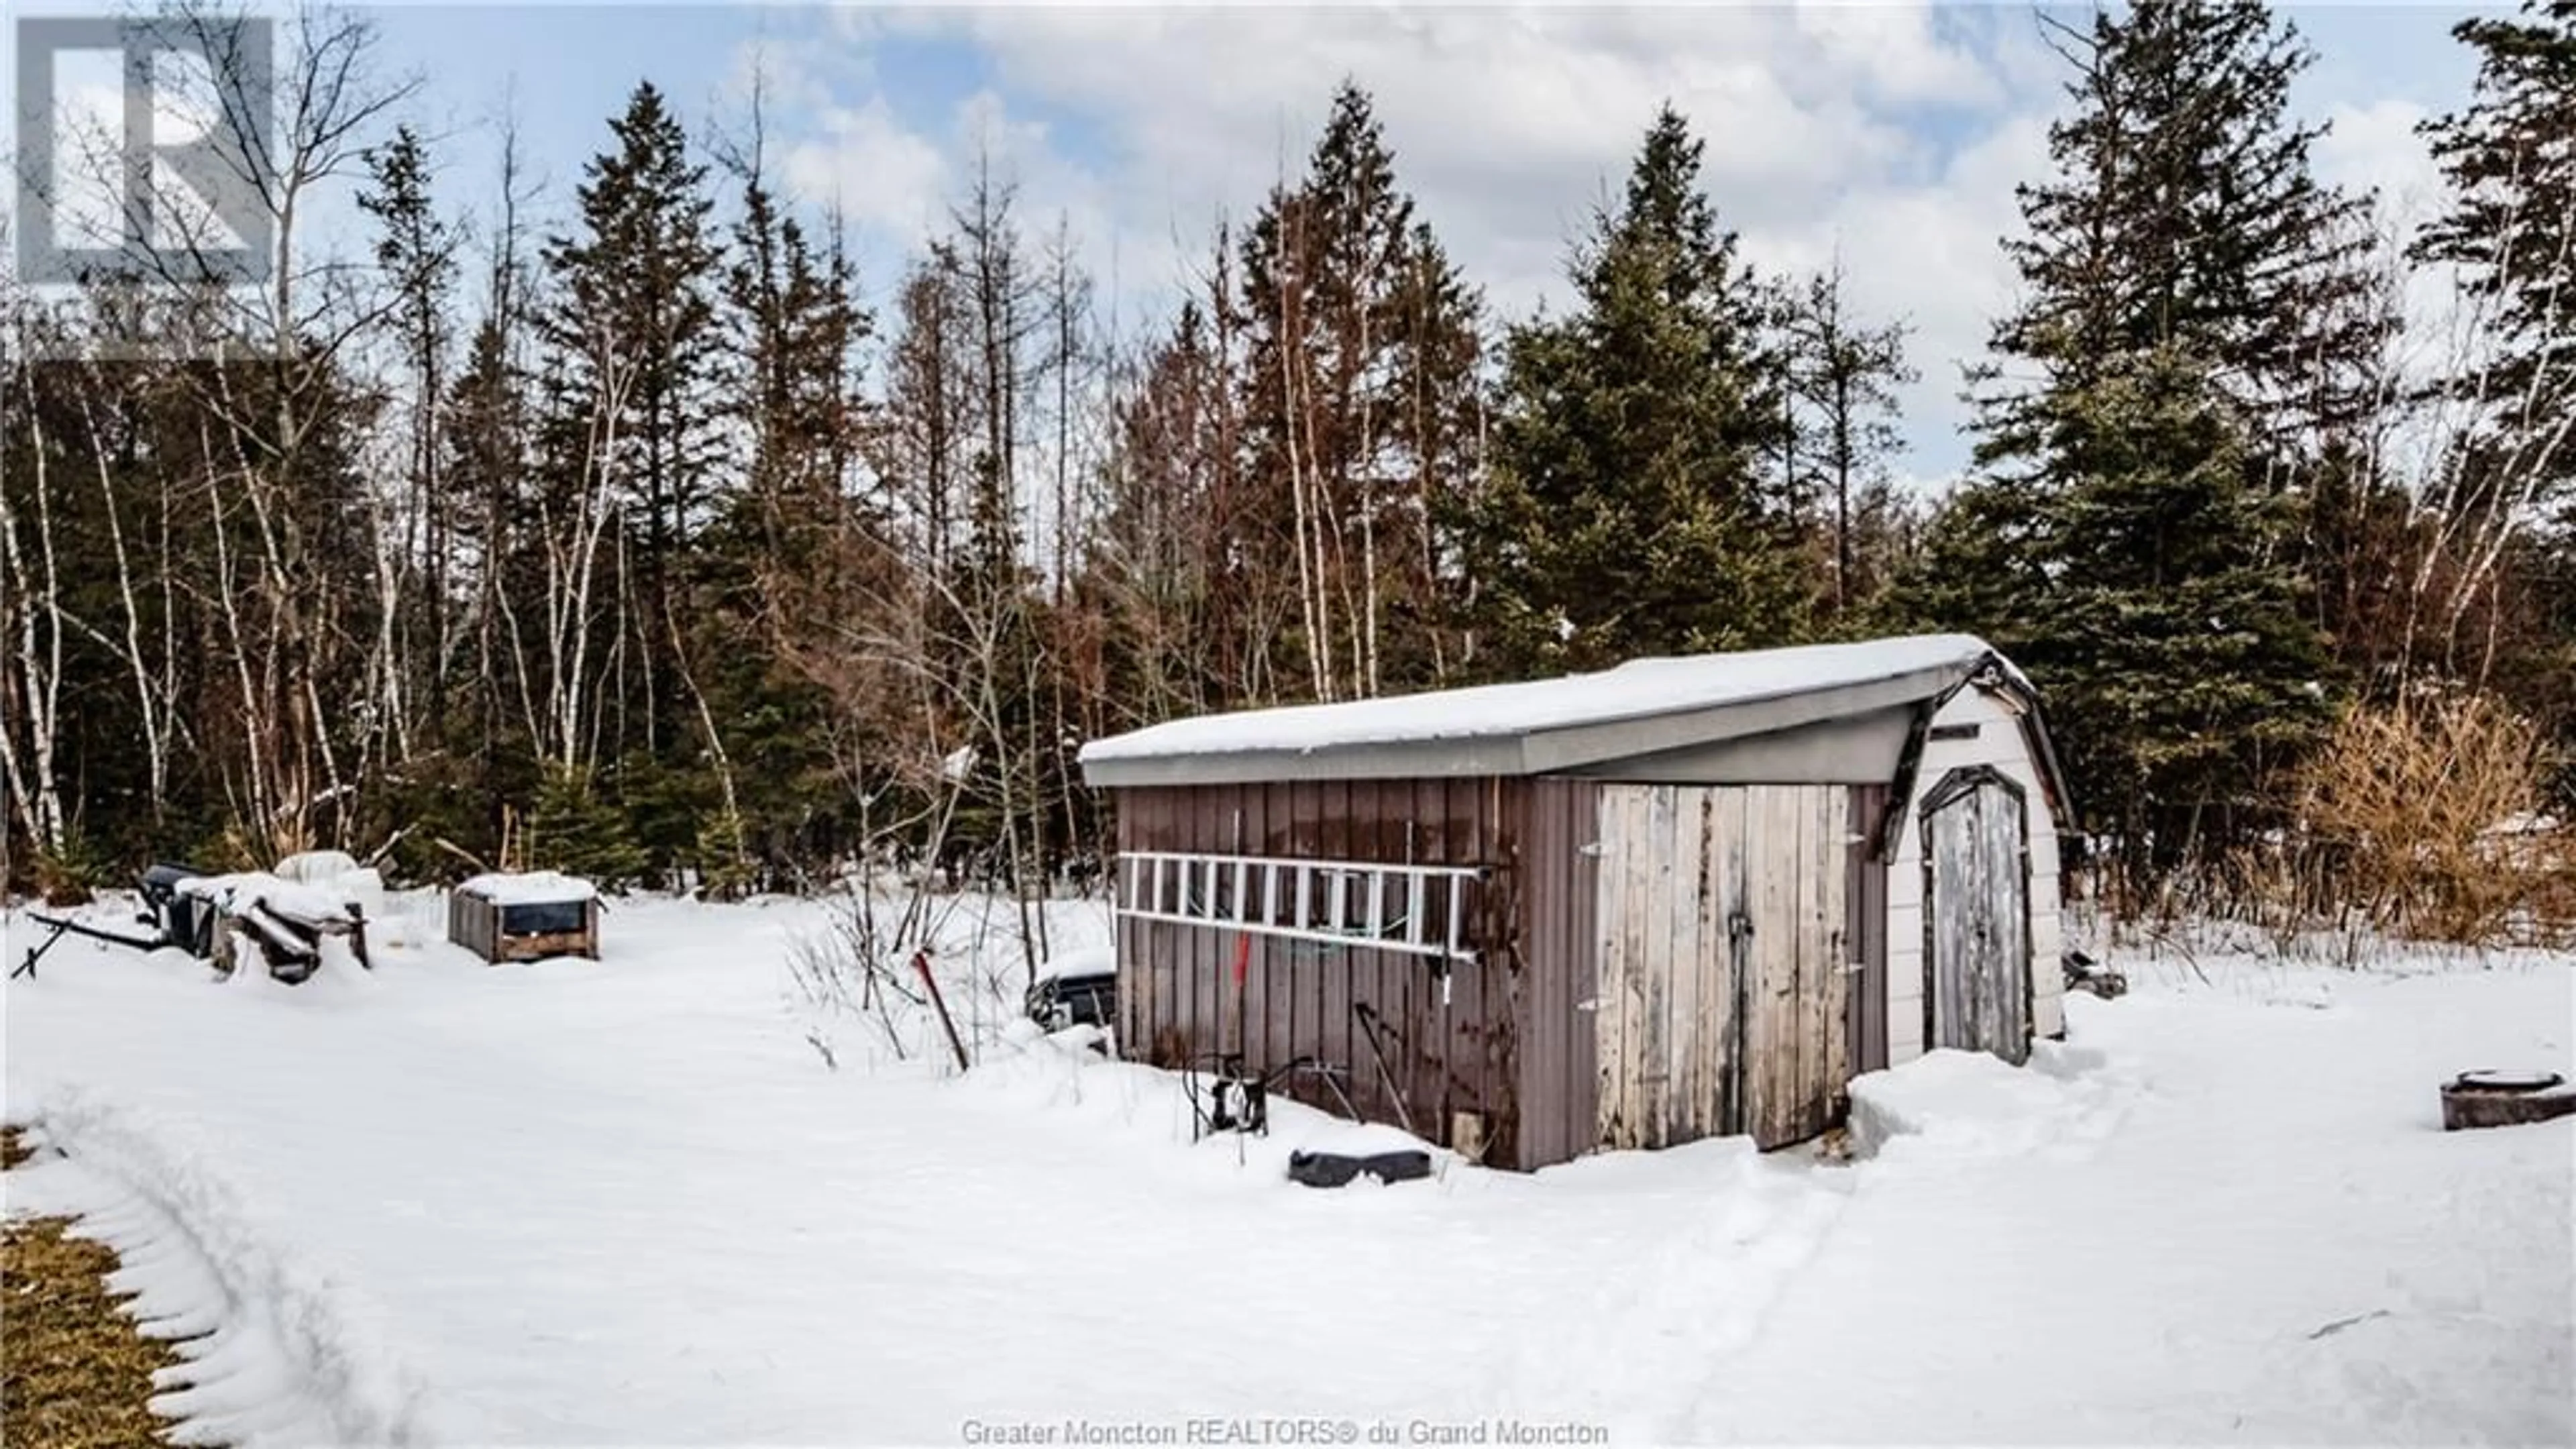 Shed for 1250 Saint Charles Nord, Saint-Charles New Brunswick E4W4T5